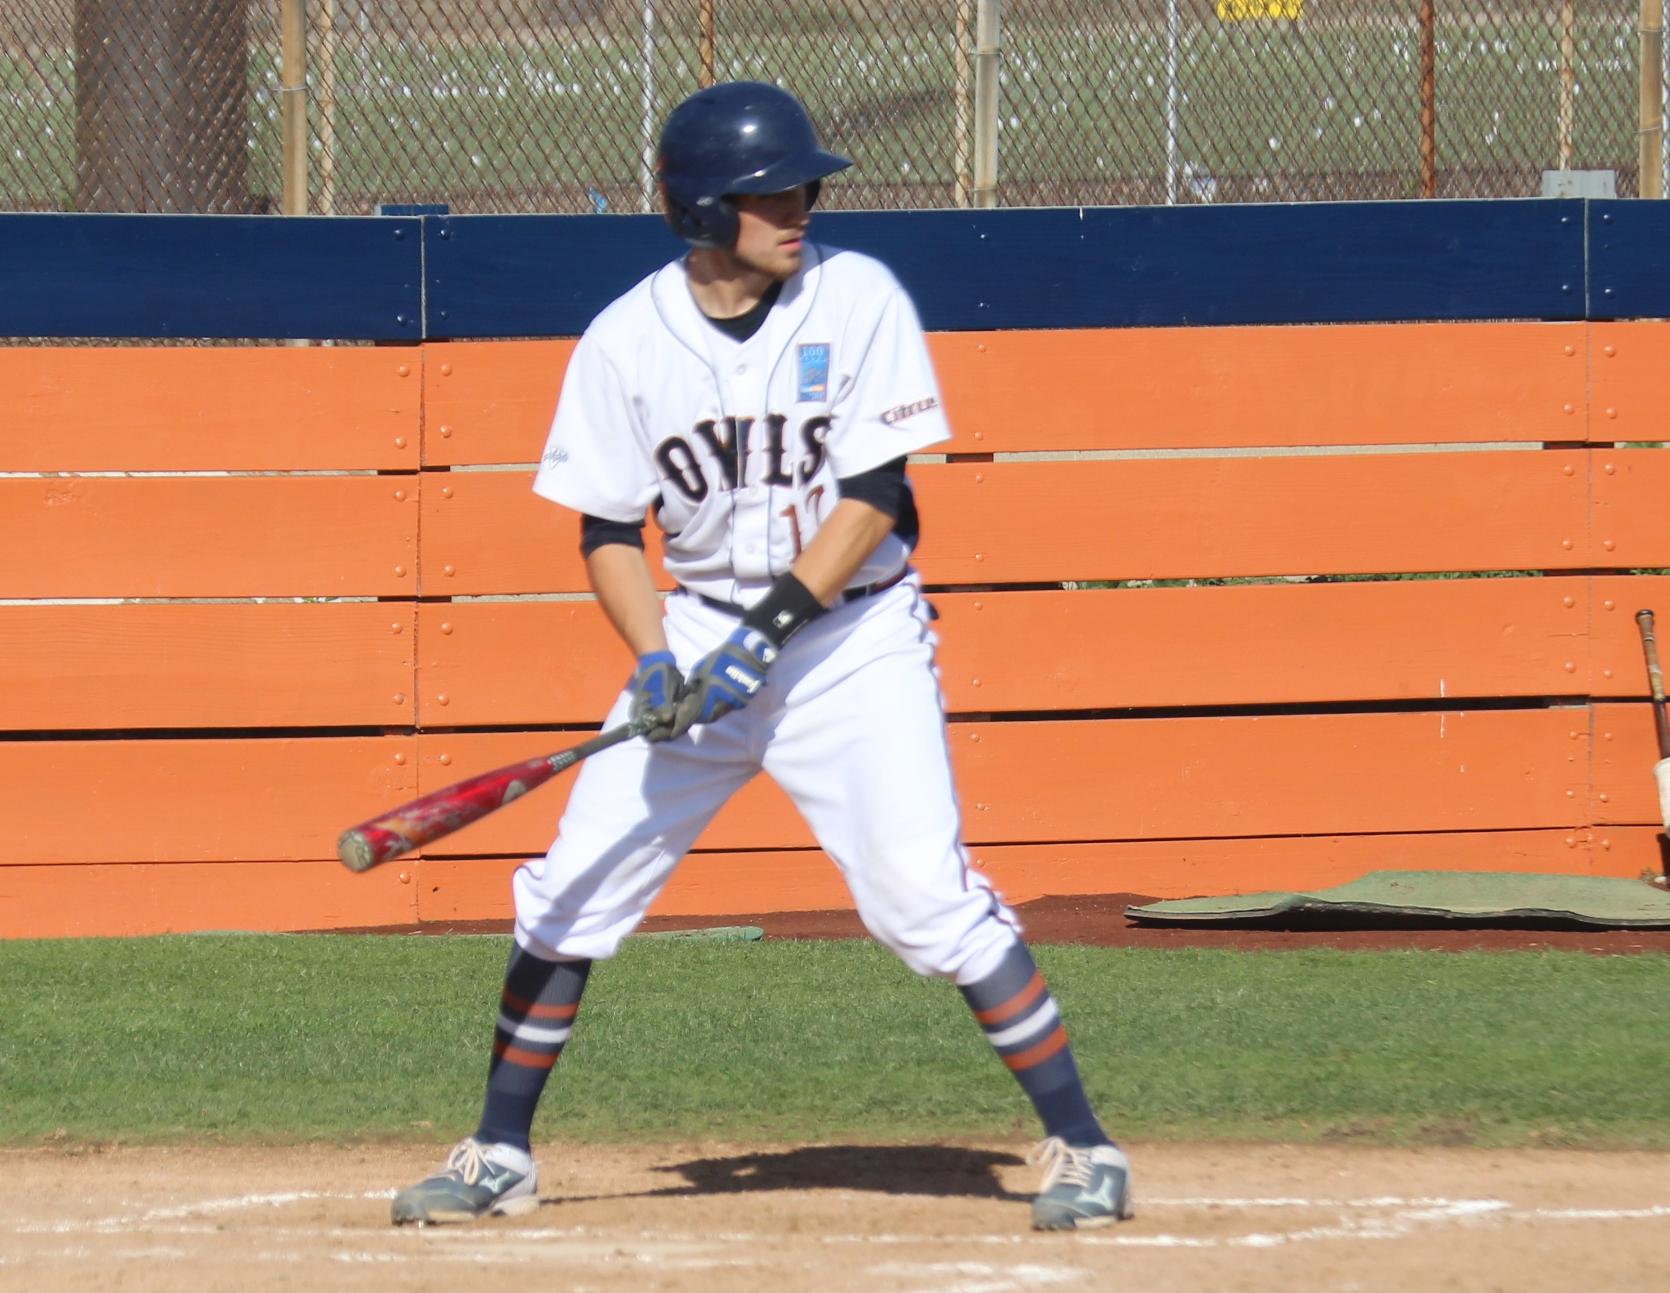 Sophomore Joseph Morreale made his first appearance in the field for the Owls in 2016 and went 2 for 3 with a pair of RBIs.